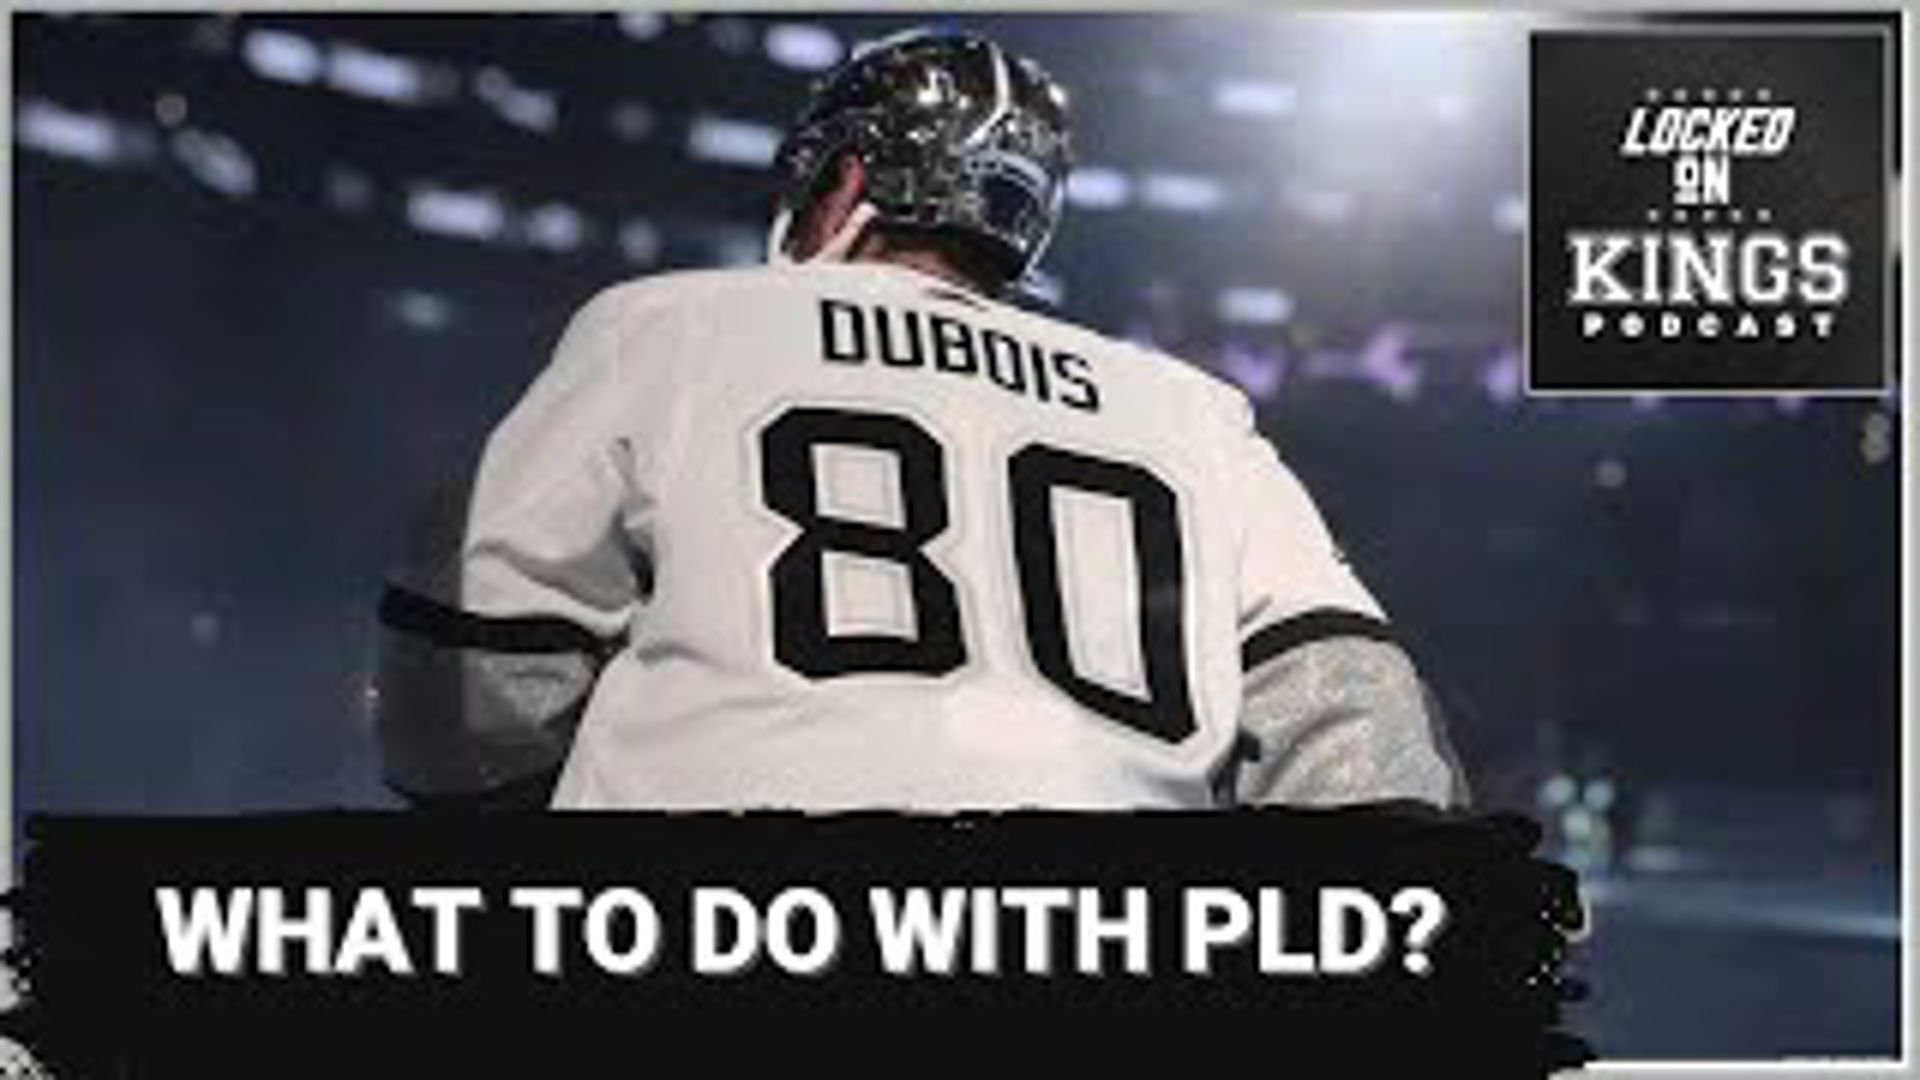 What should the LA Kings do with Pierre Luc Dubois? Buy him out, trade him, stay the course? We discuss that and more on this edition of Locked on LA Kings.